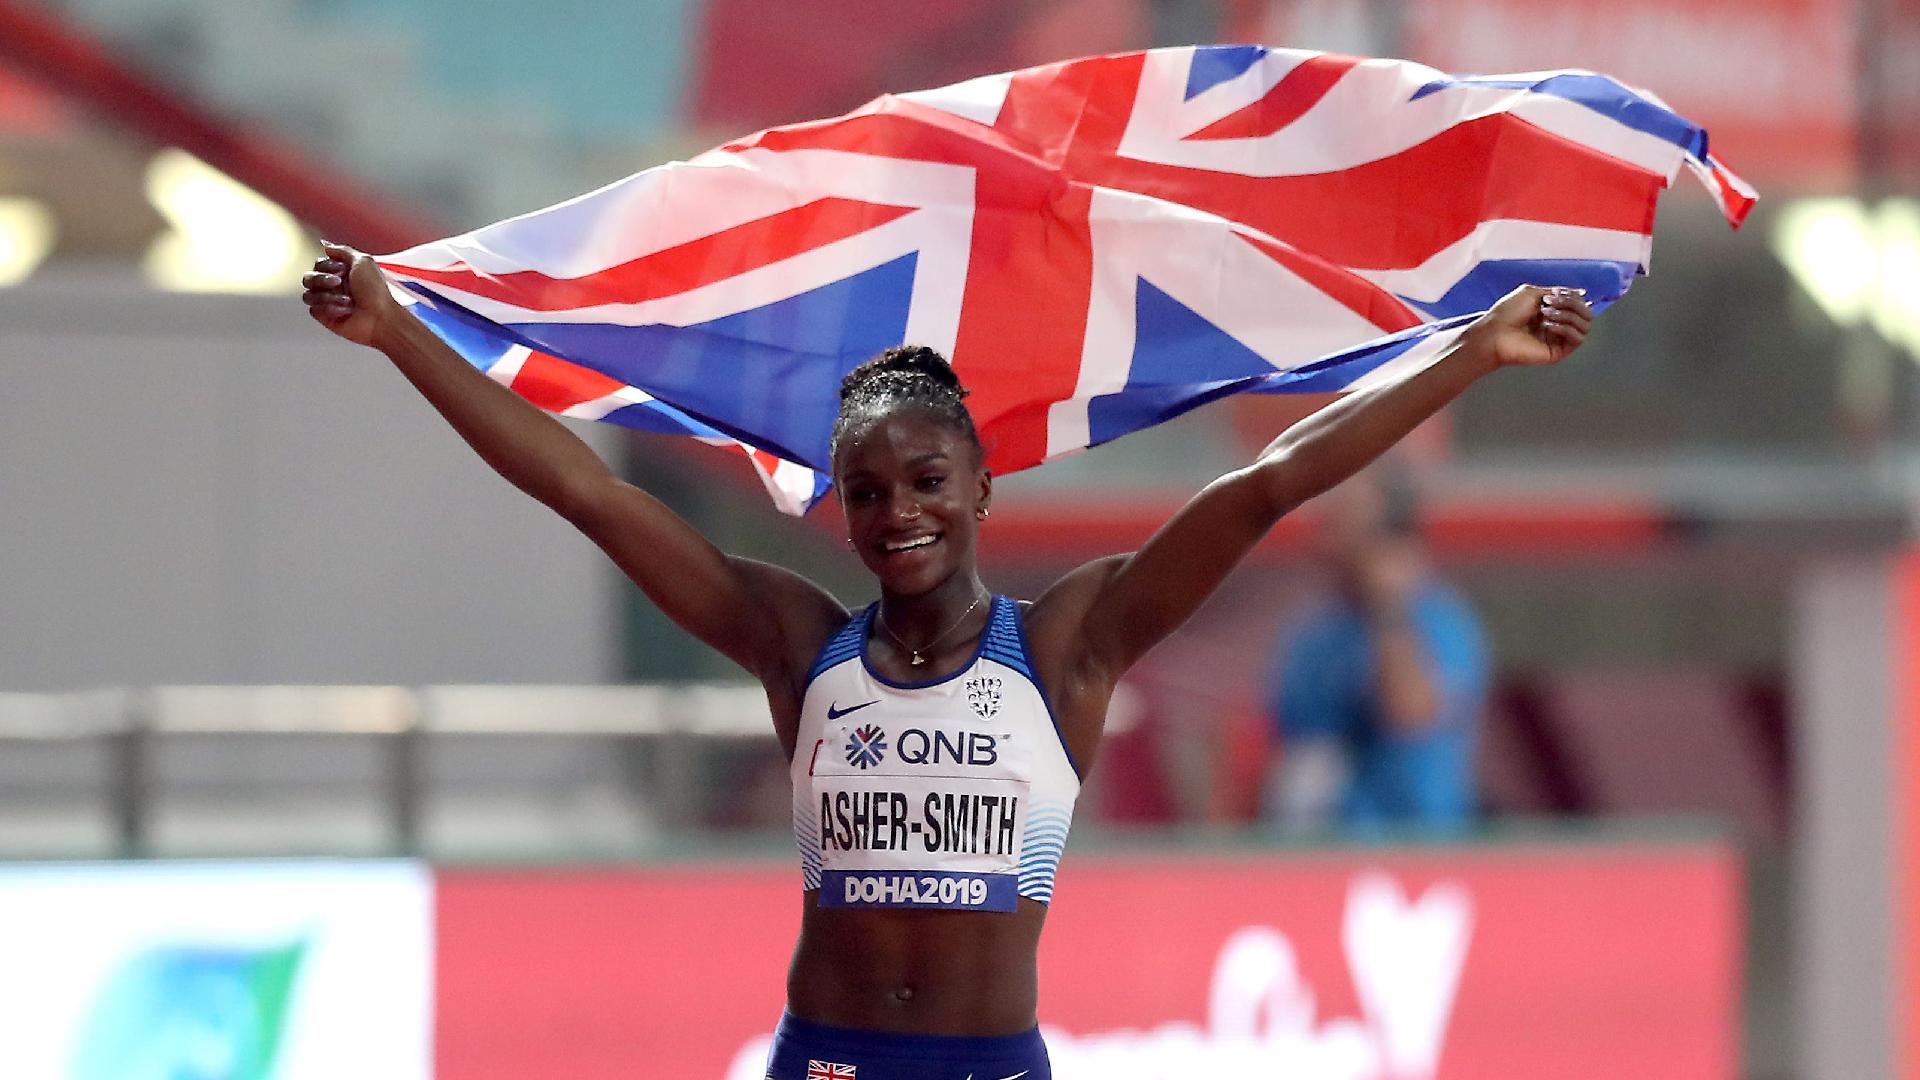 On This Day in 2019: Dina Asher-Smith wins gold at World Athletics Championships